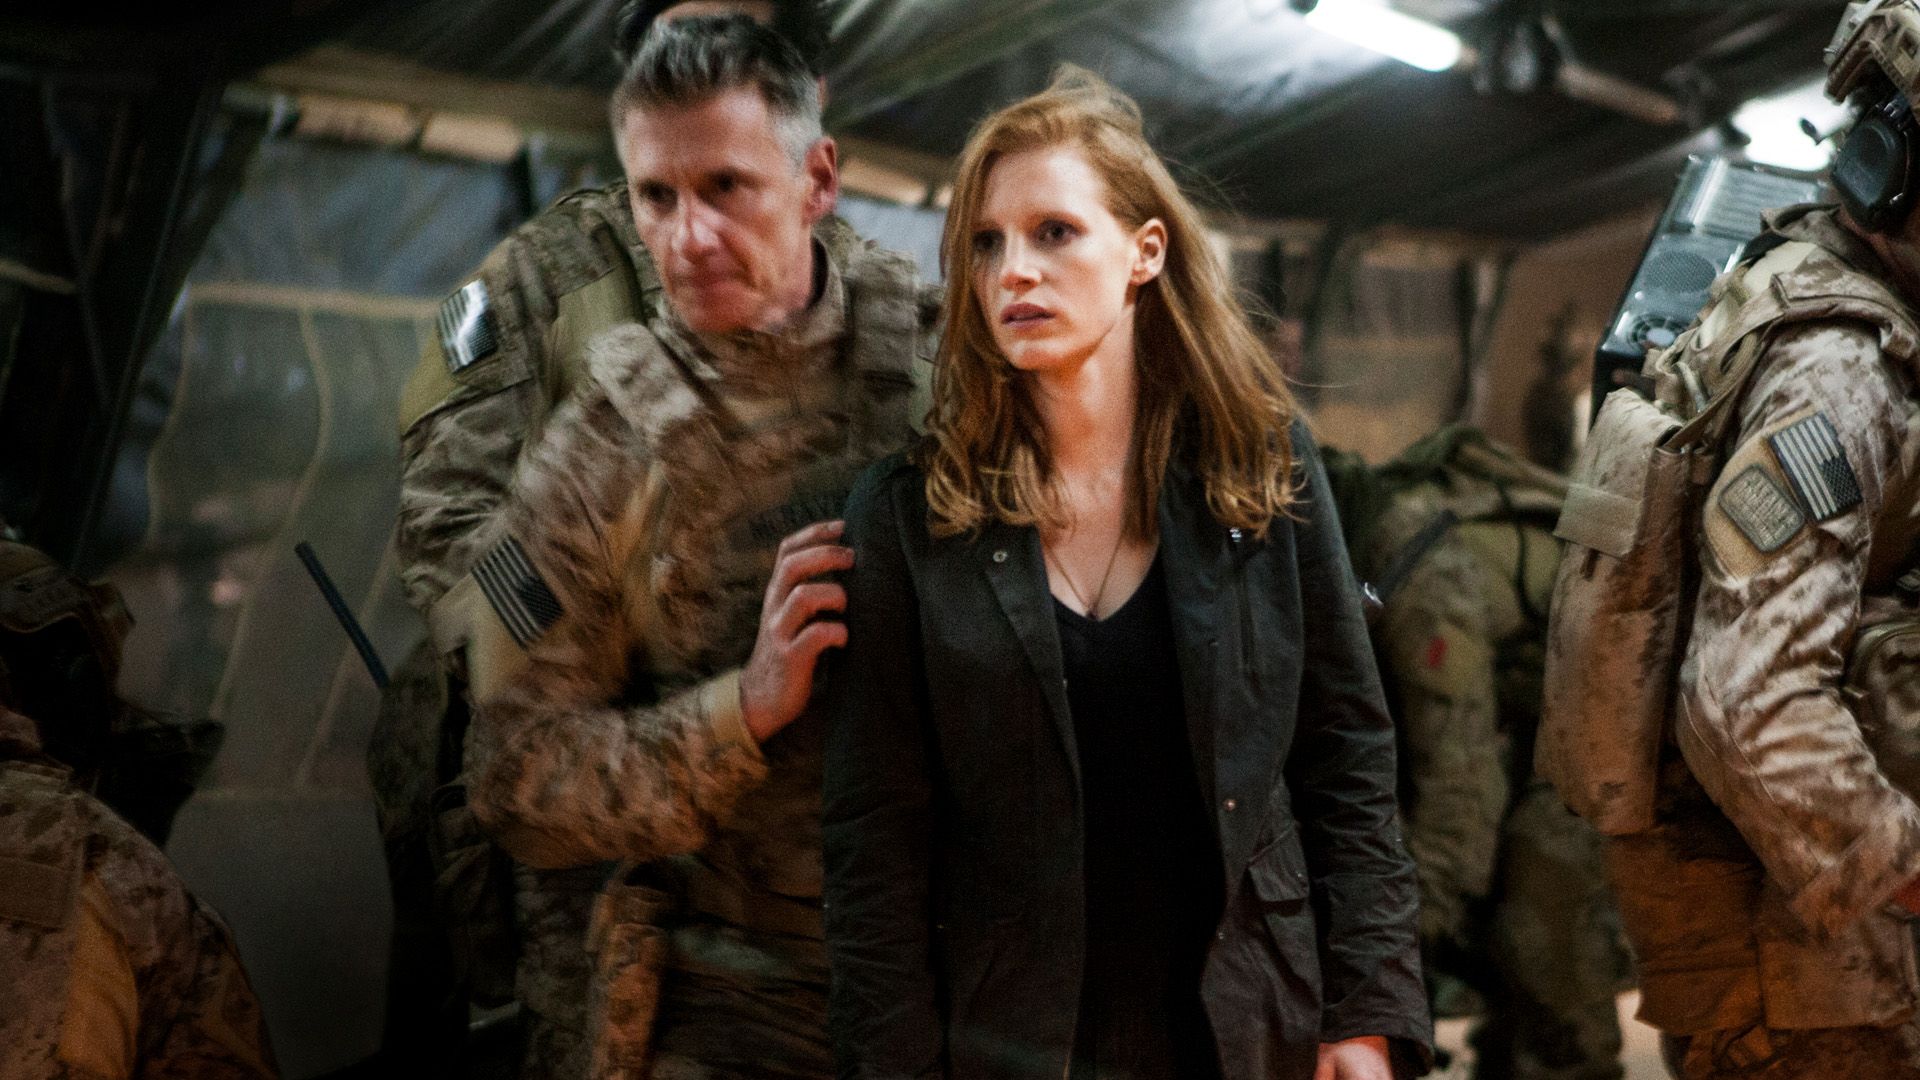 Jessica Chastain Talks About Tom Cruise's Classy Move That Allowed Her to Star in ZERO DARK THIRTY